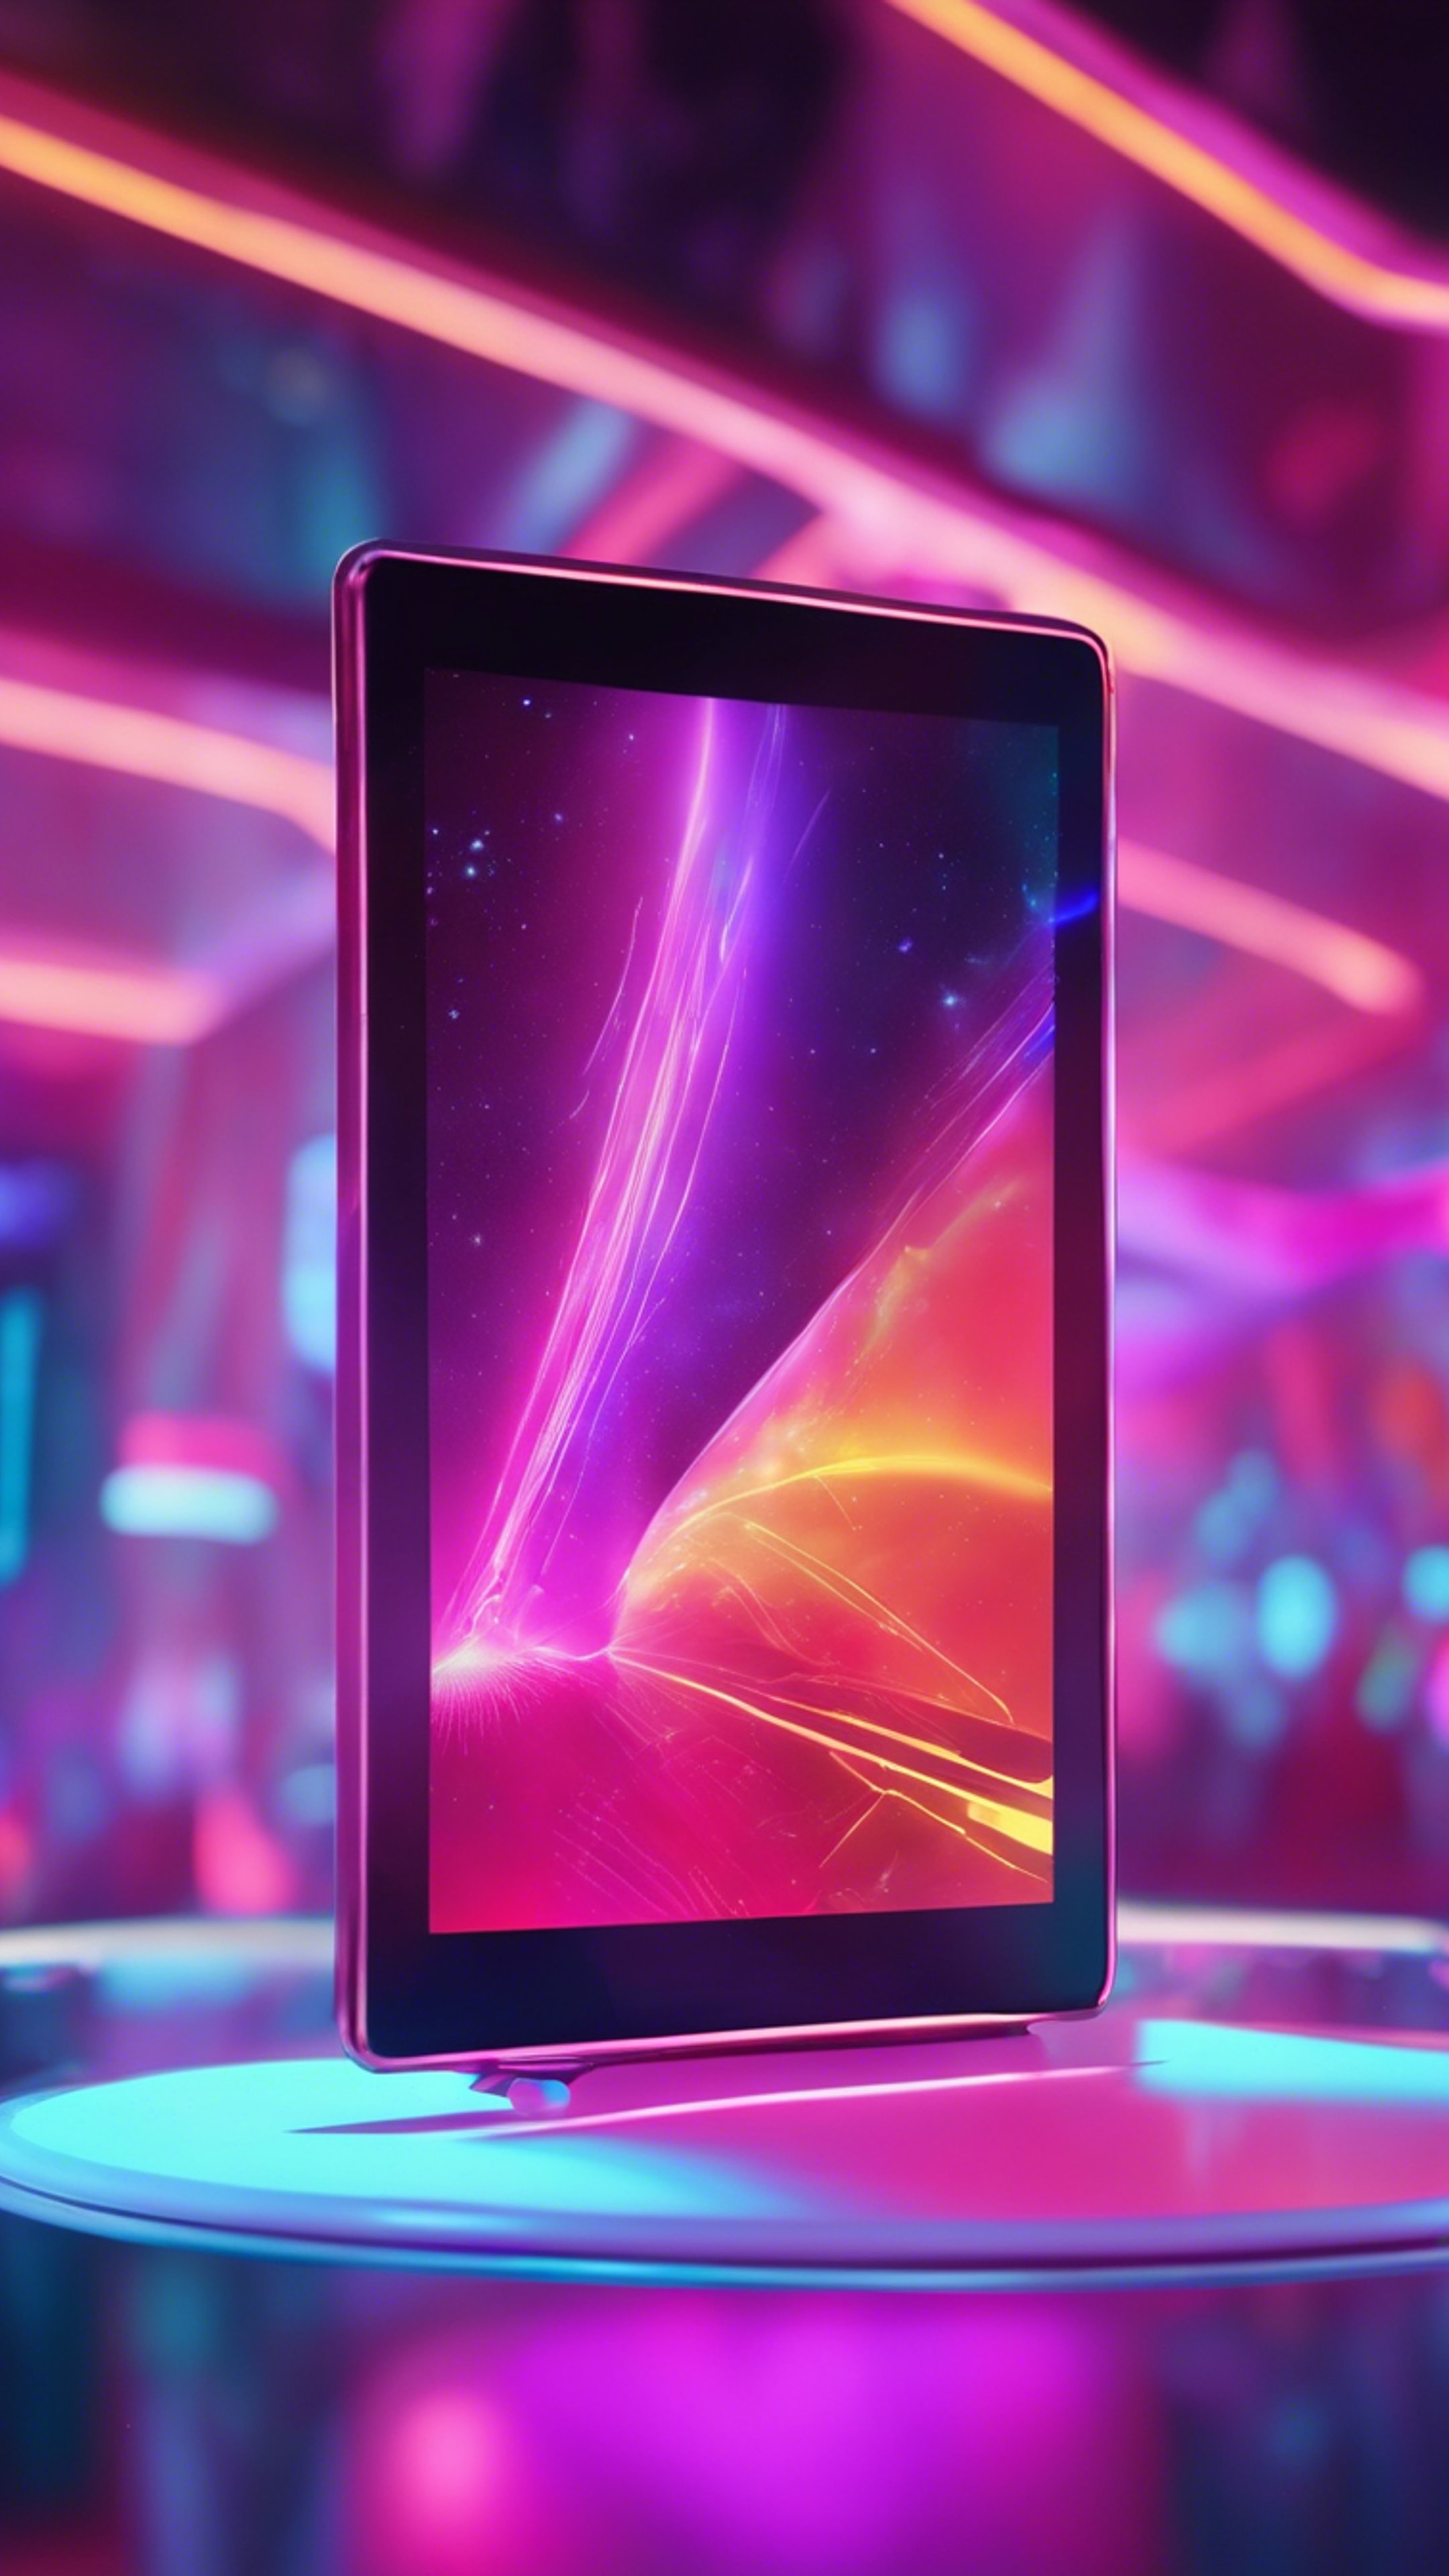 An ultra-modern tablet with a holographic touch screen floating in a futuristic, vividly colored neon environment. Tapet[25bfd648fdfb4eaf80d5]